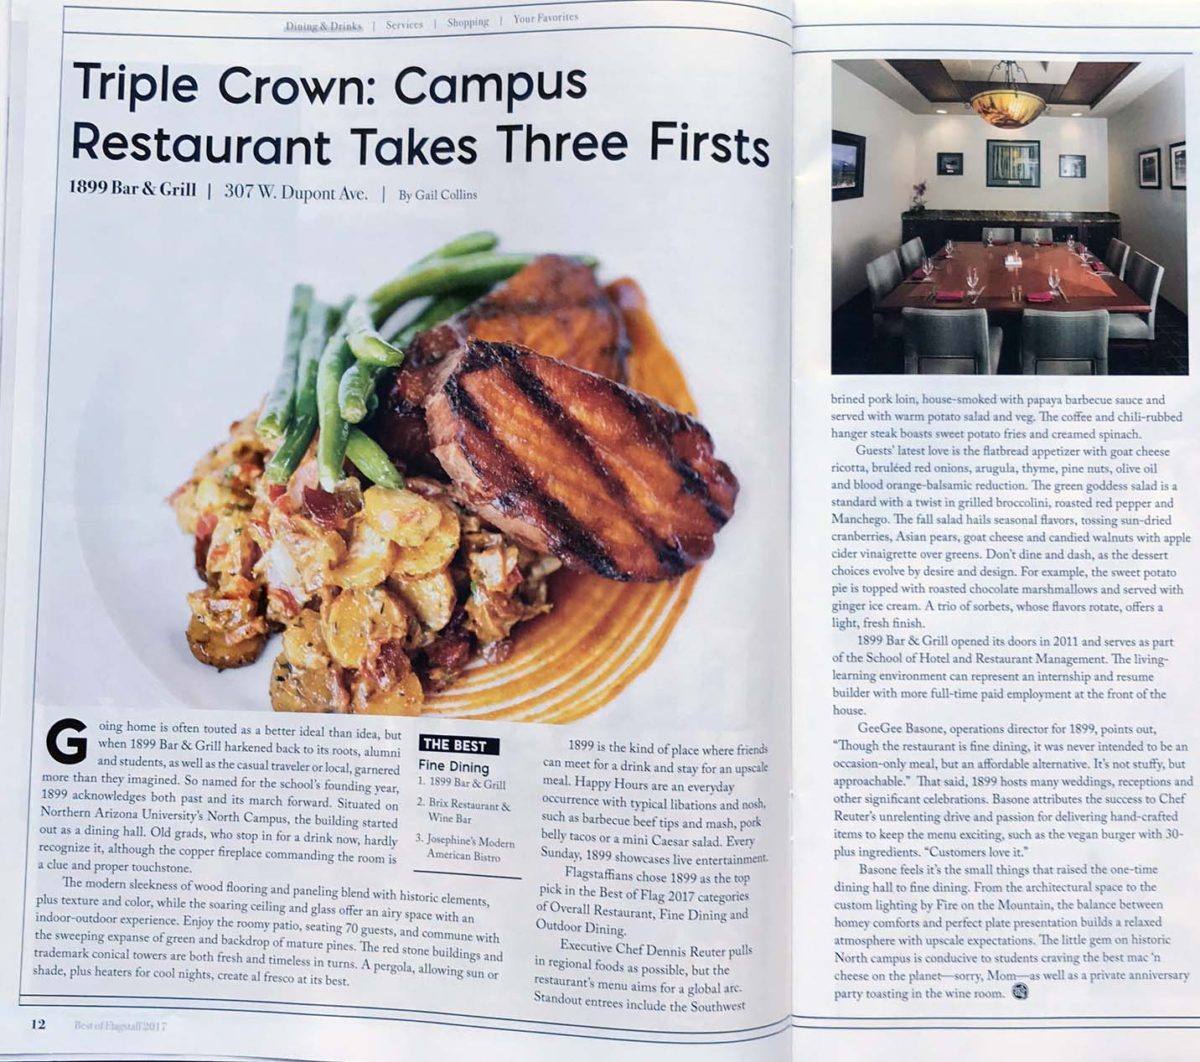 Triple Crown:  Campus Restaurant Takes Three Firsts